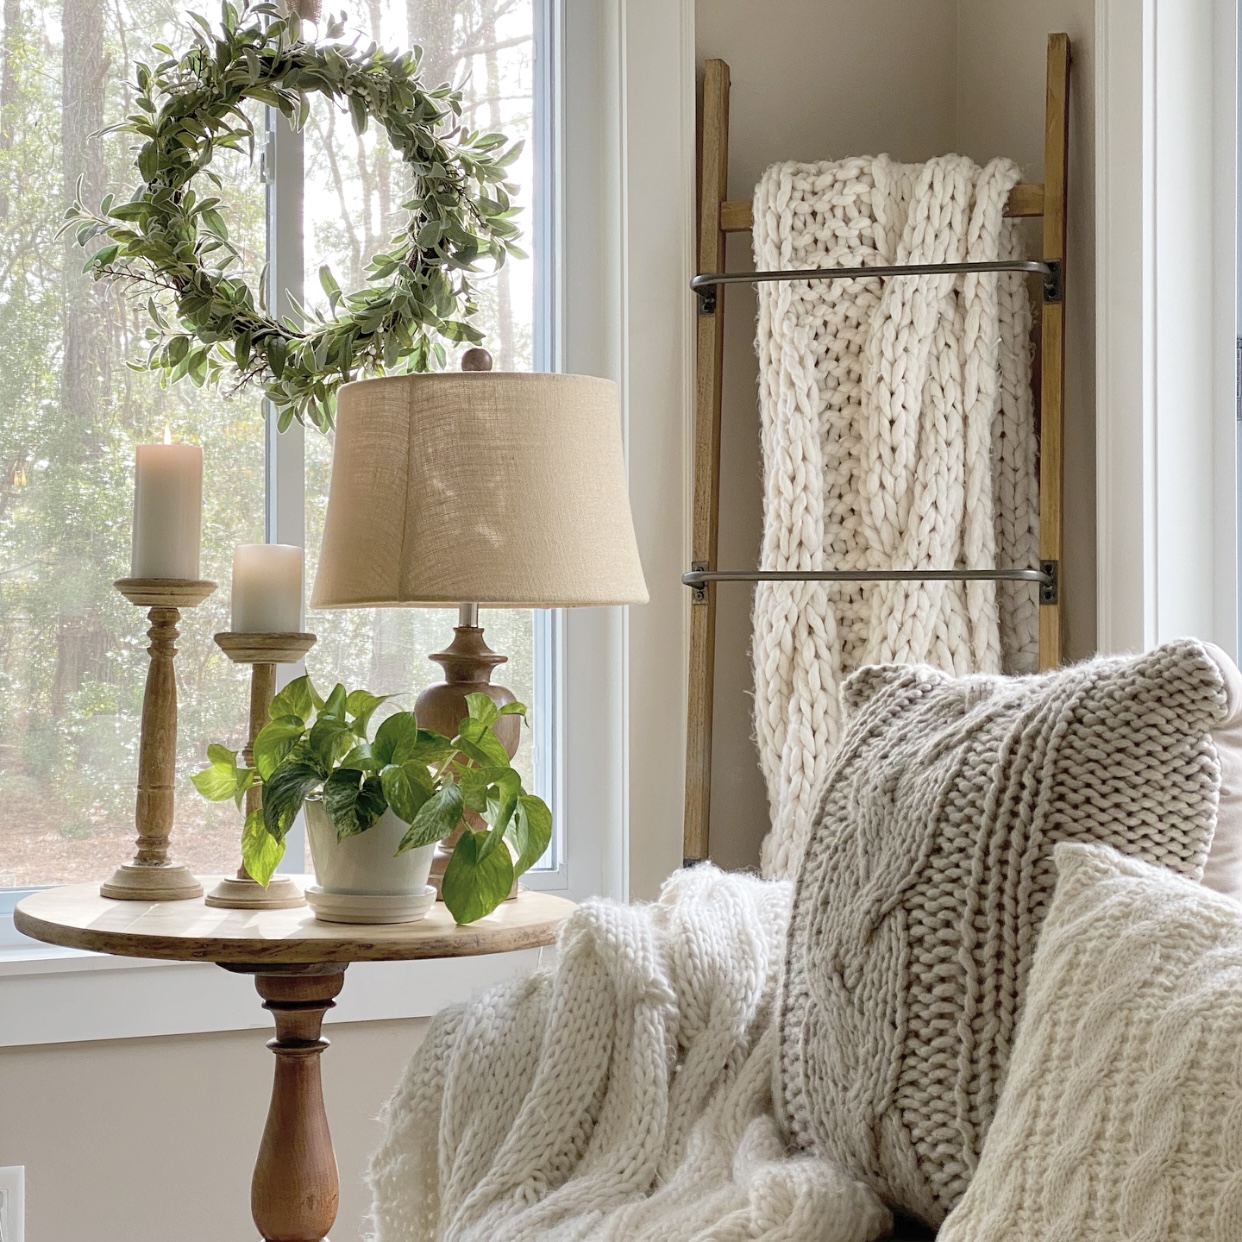 Cozy corner with knit blankets and candles on a side table with a green plant.